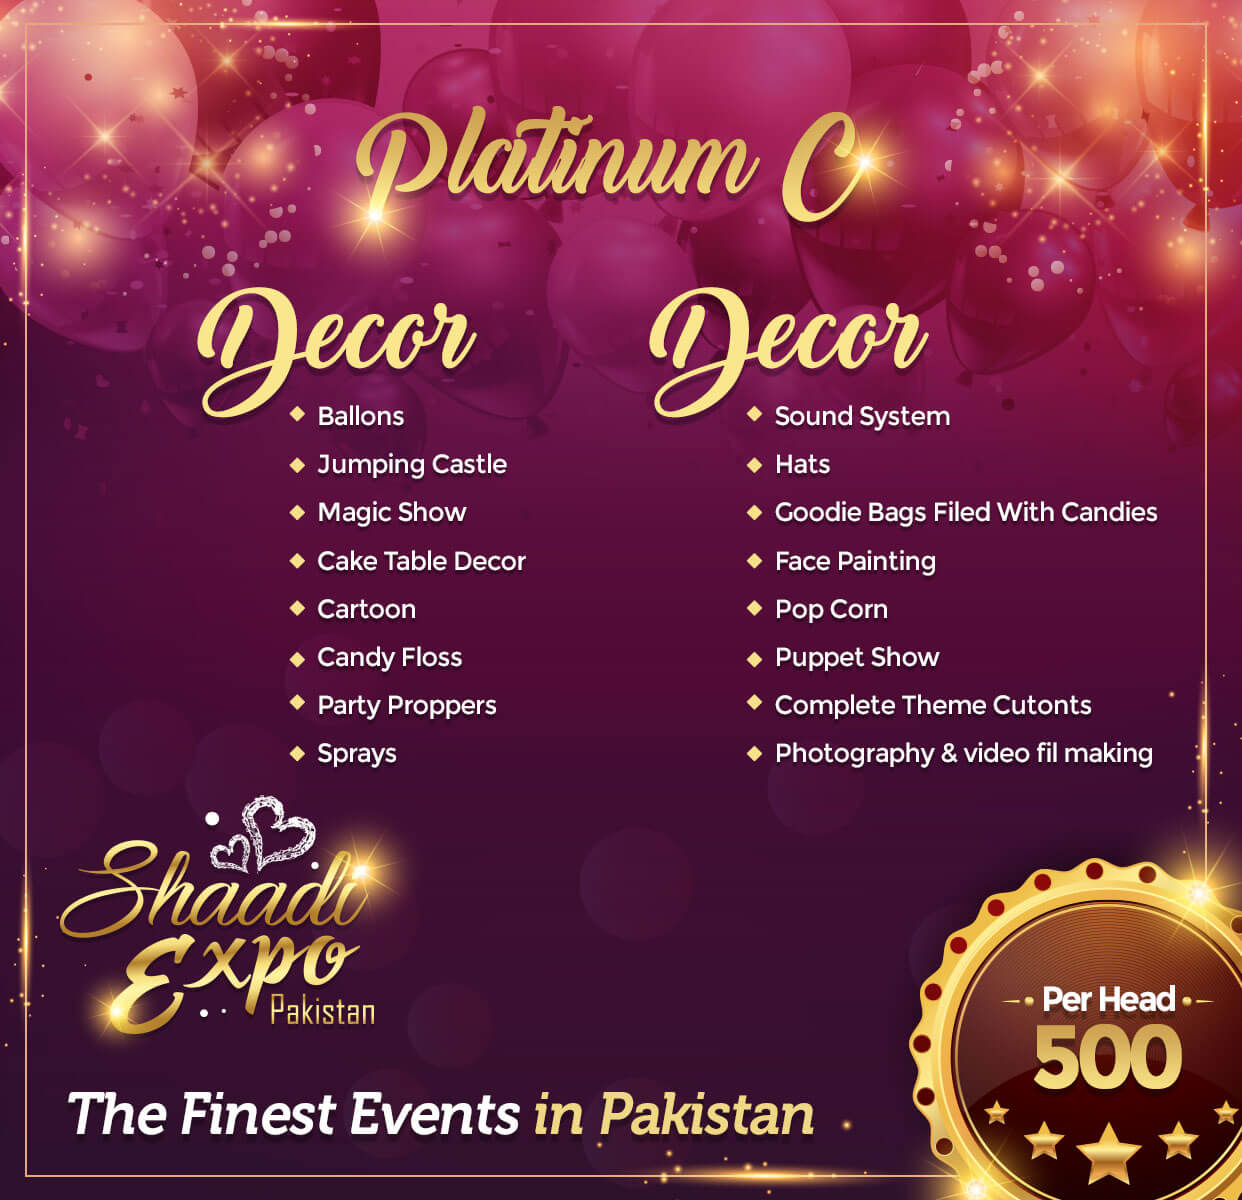 Packages - Shaadi Expo Pakistan